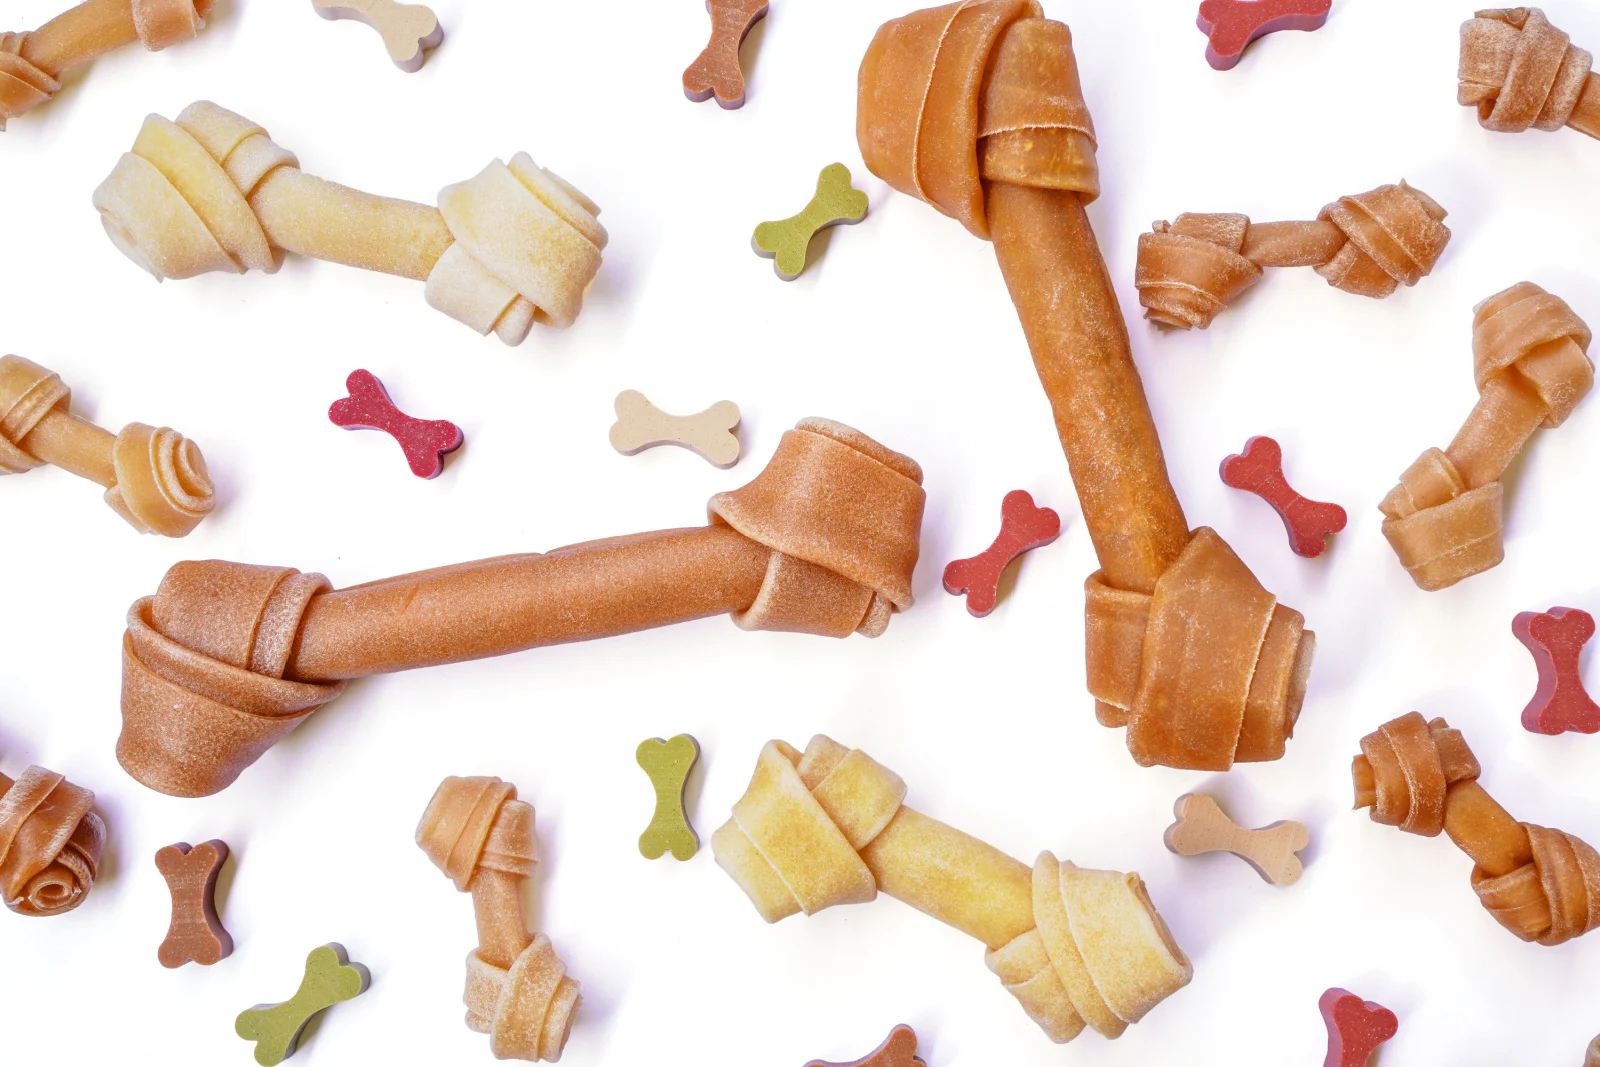 Top view of Dog knotted bone or rawhide and colorful dog snack